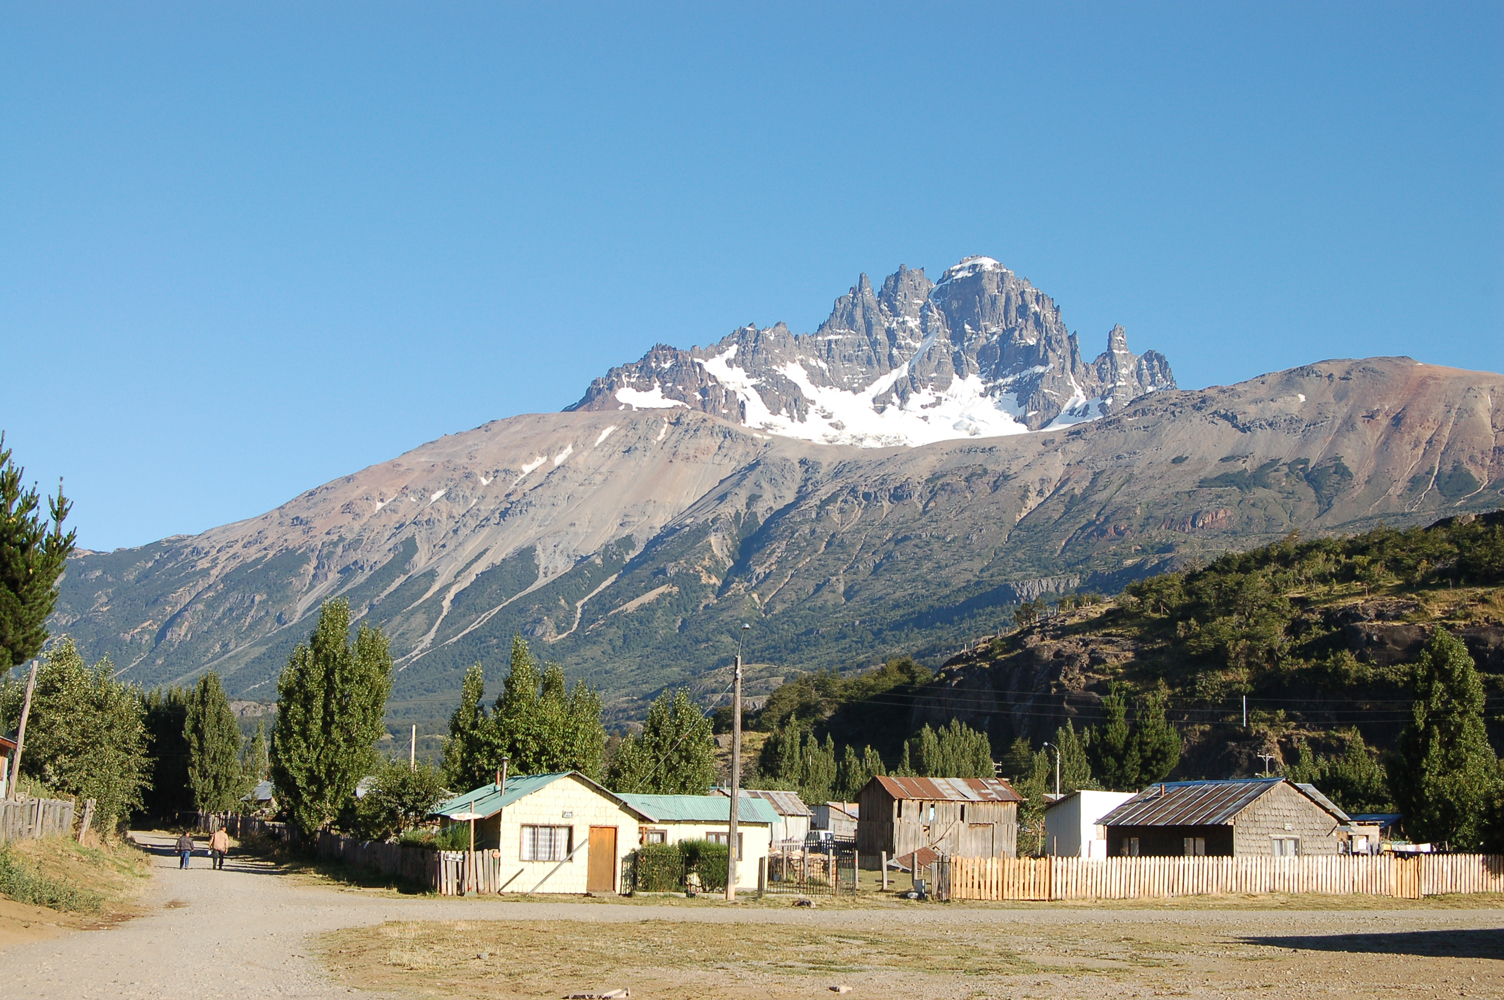 A classic Patagonian scene from Headwater's Chilean Adventure!